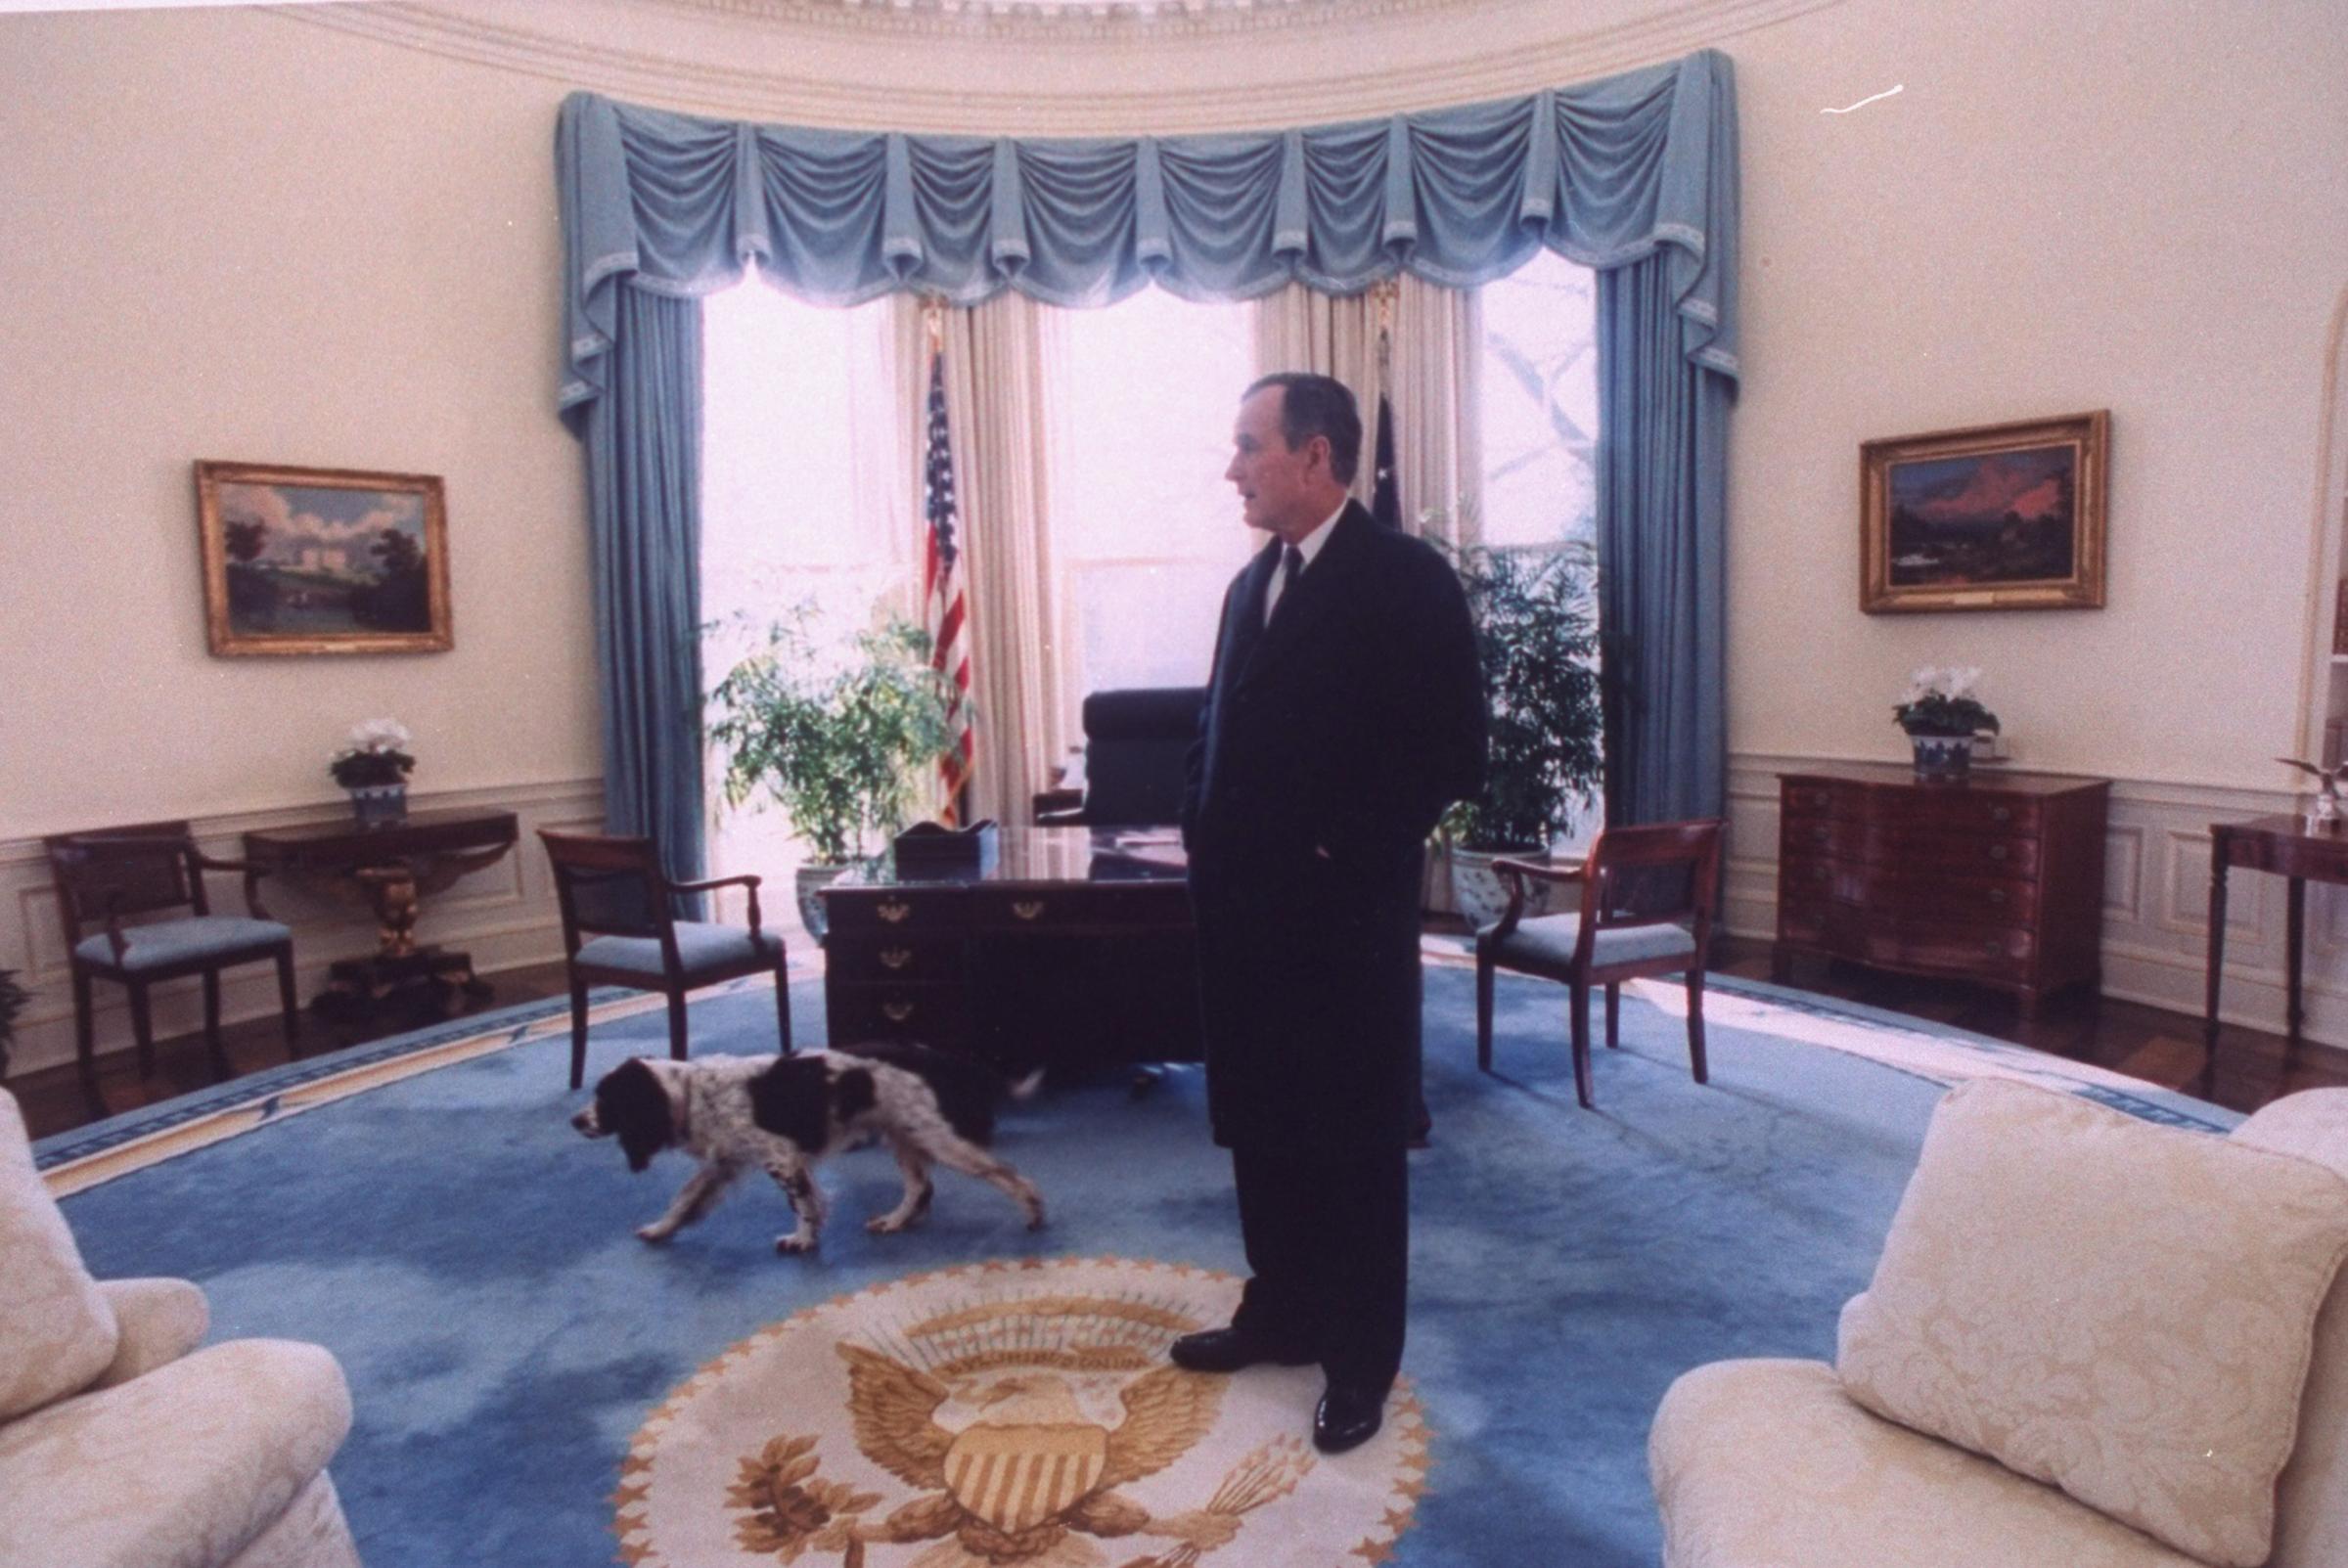 President George H.W. Bush taking a last look around the Oval Office with his dog Ranger, before vacating the White House to incoming president Bill Clinton in Washington on January 2, 1993.